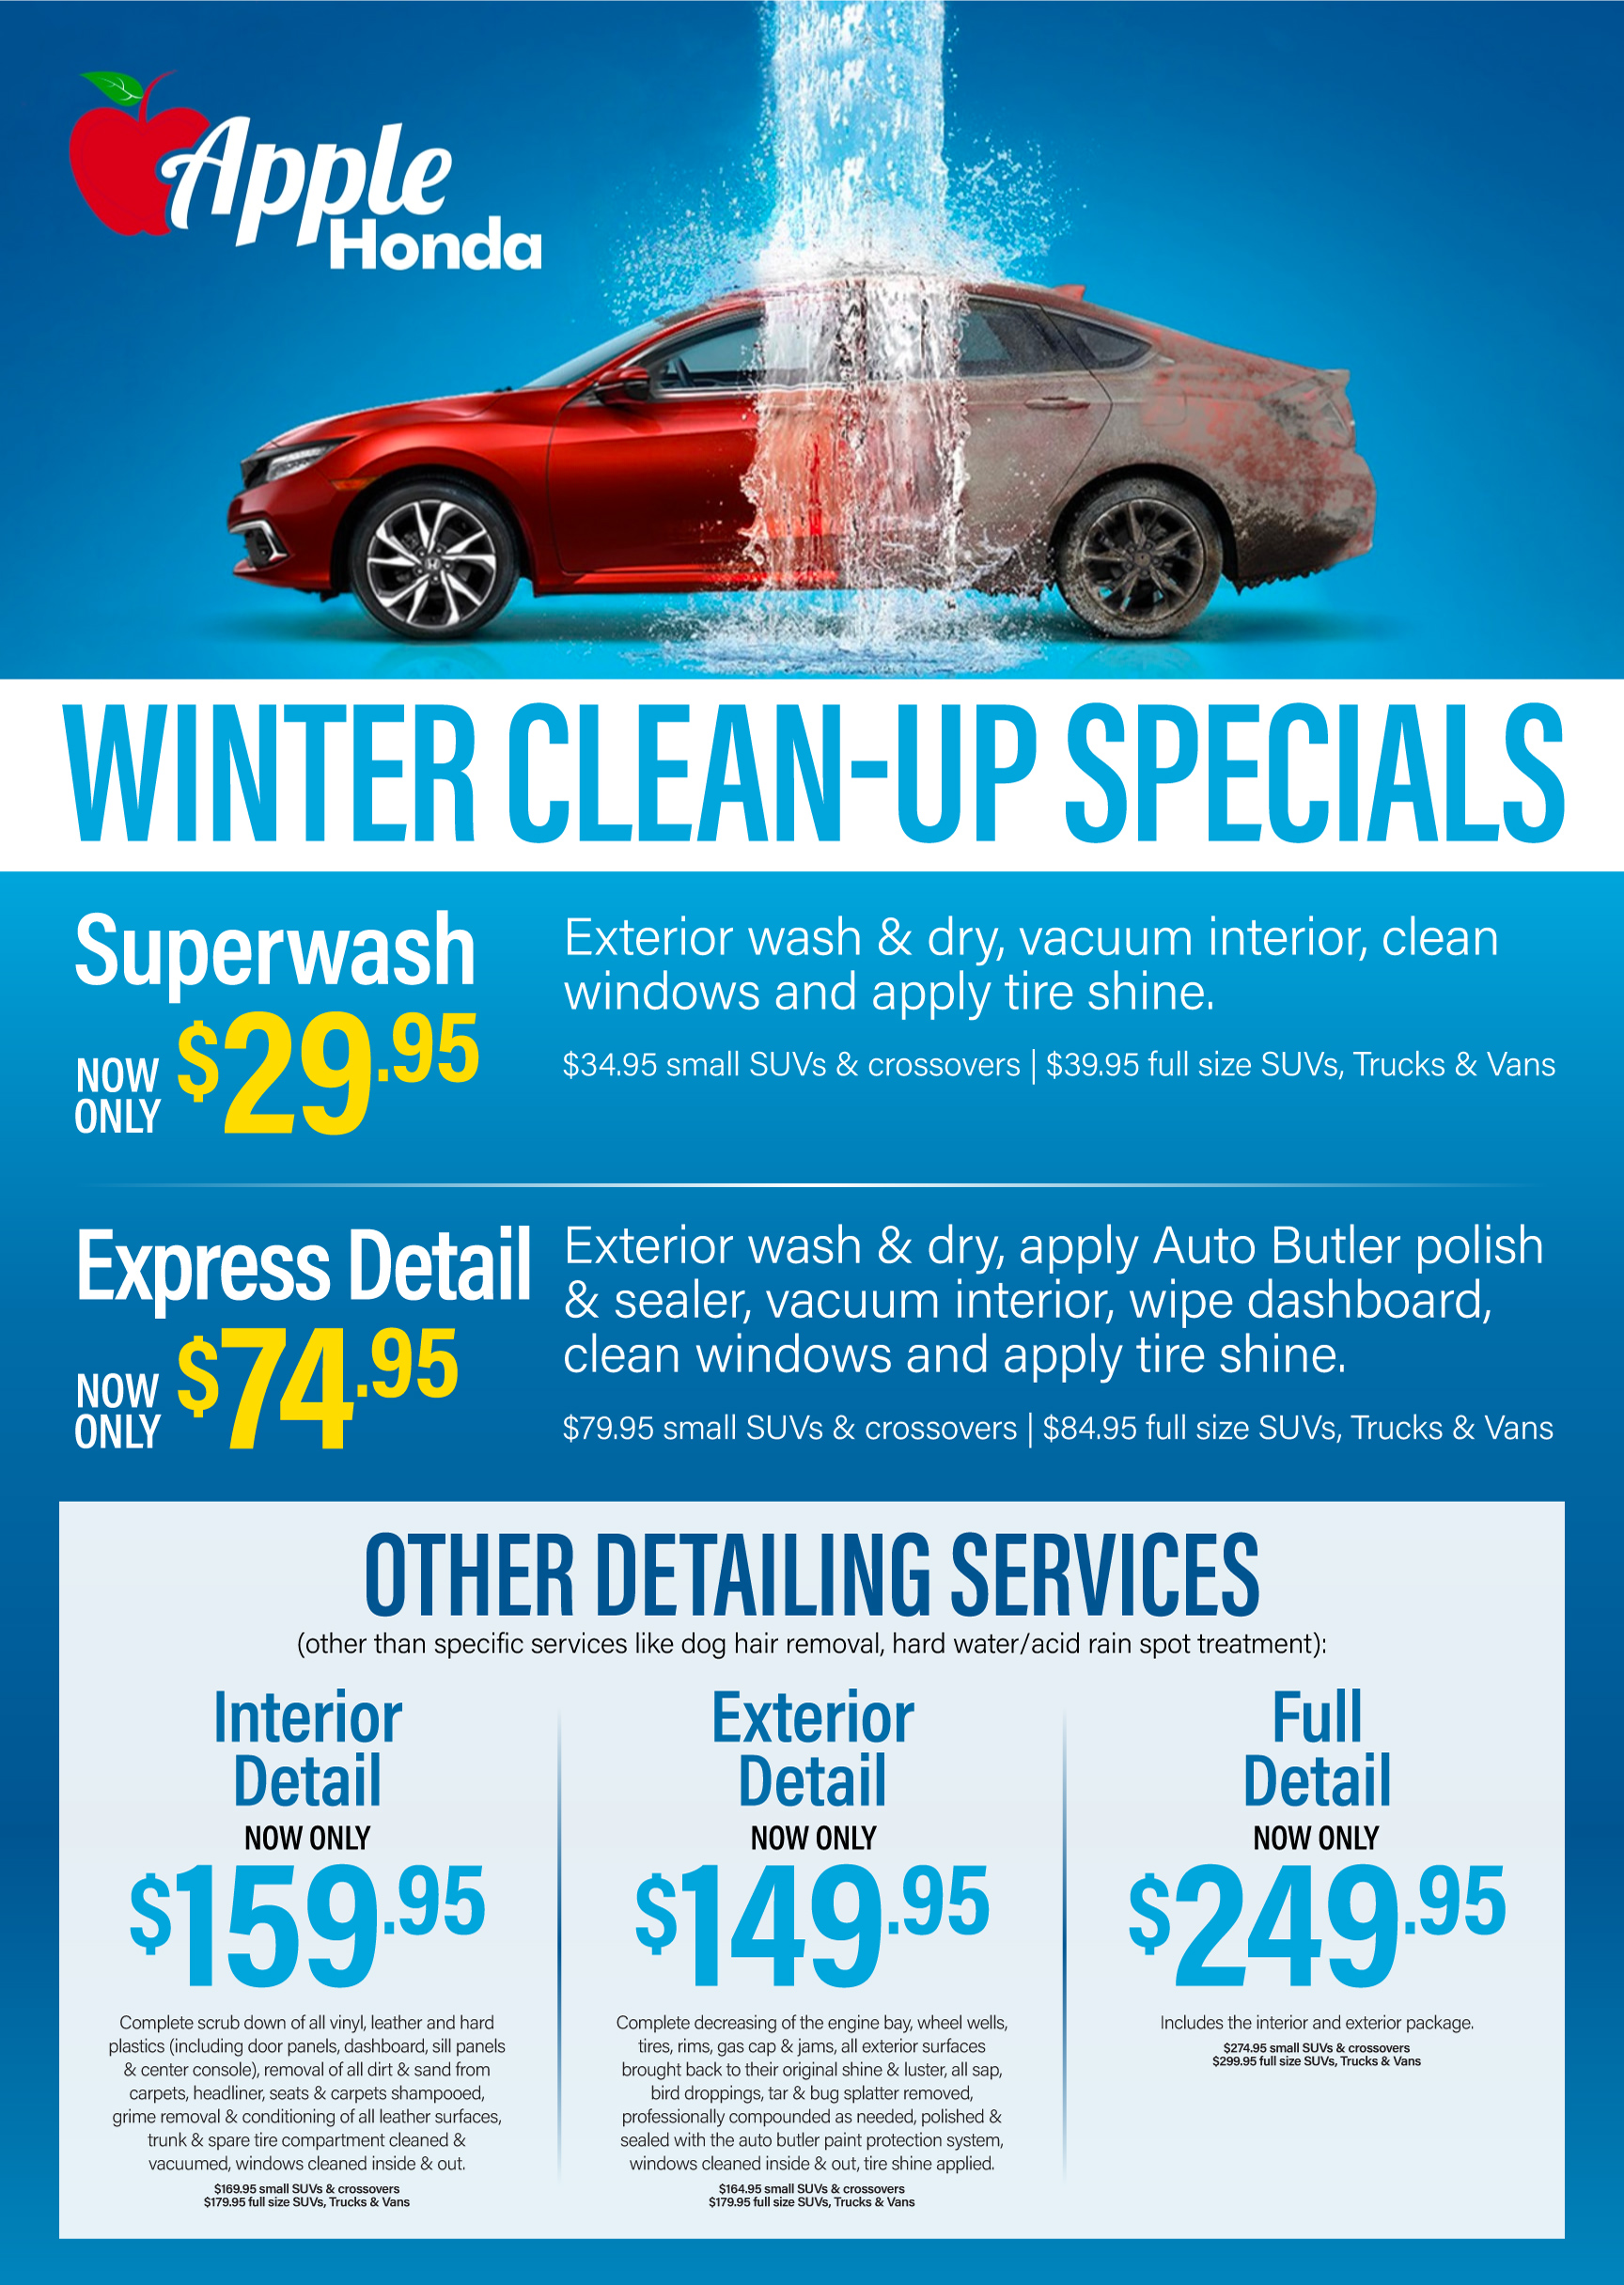 Winter Clean-Up Specials from Apple Honda - Superwash now only $29.95, Express Detail now only $74.95